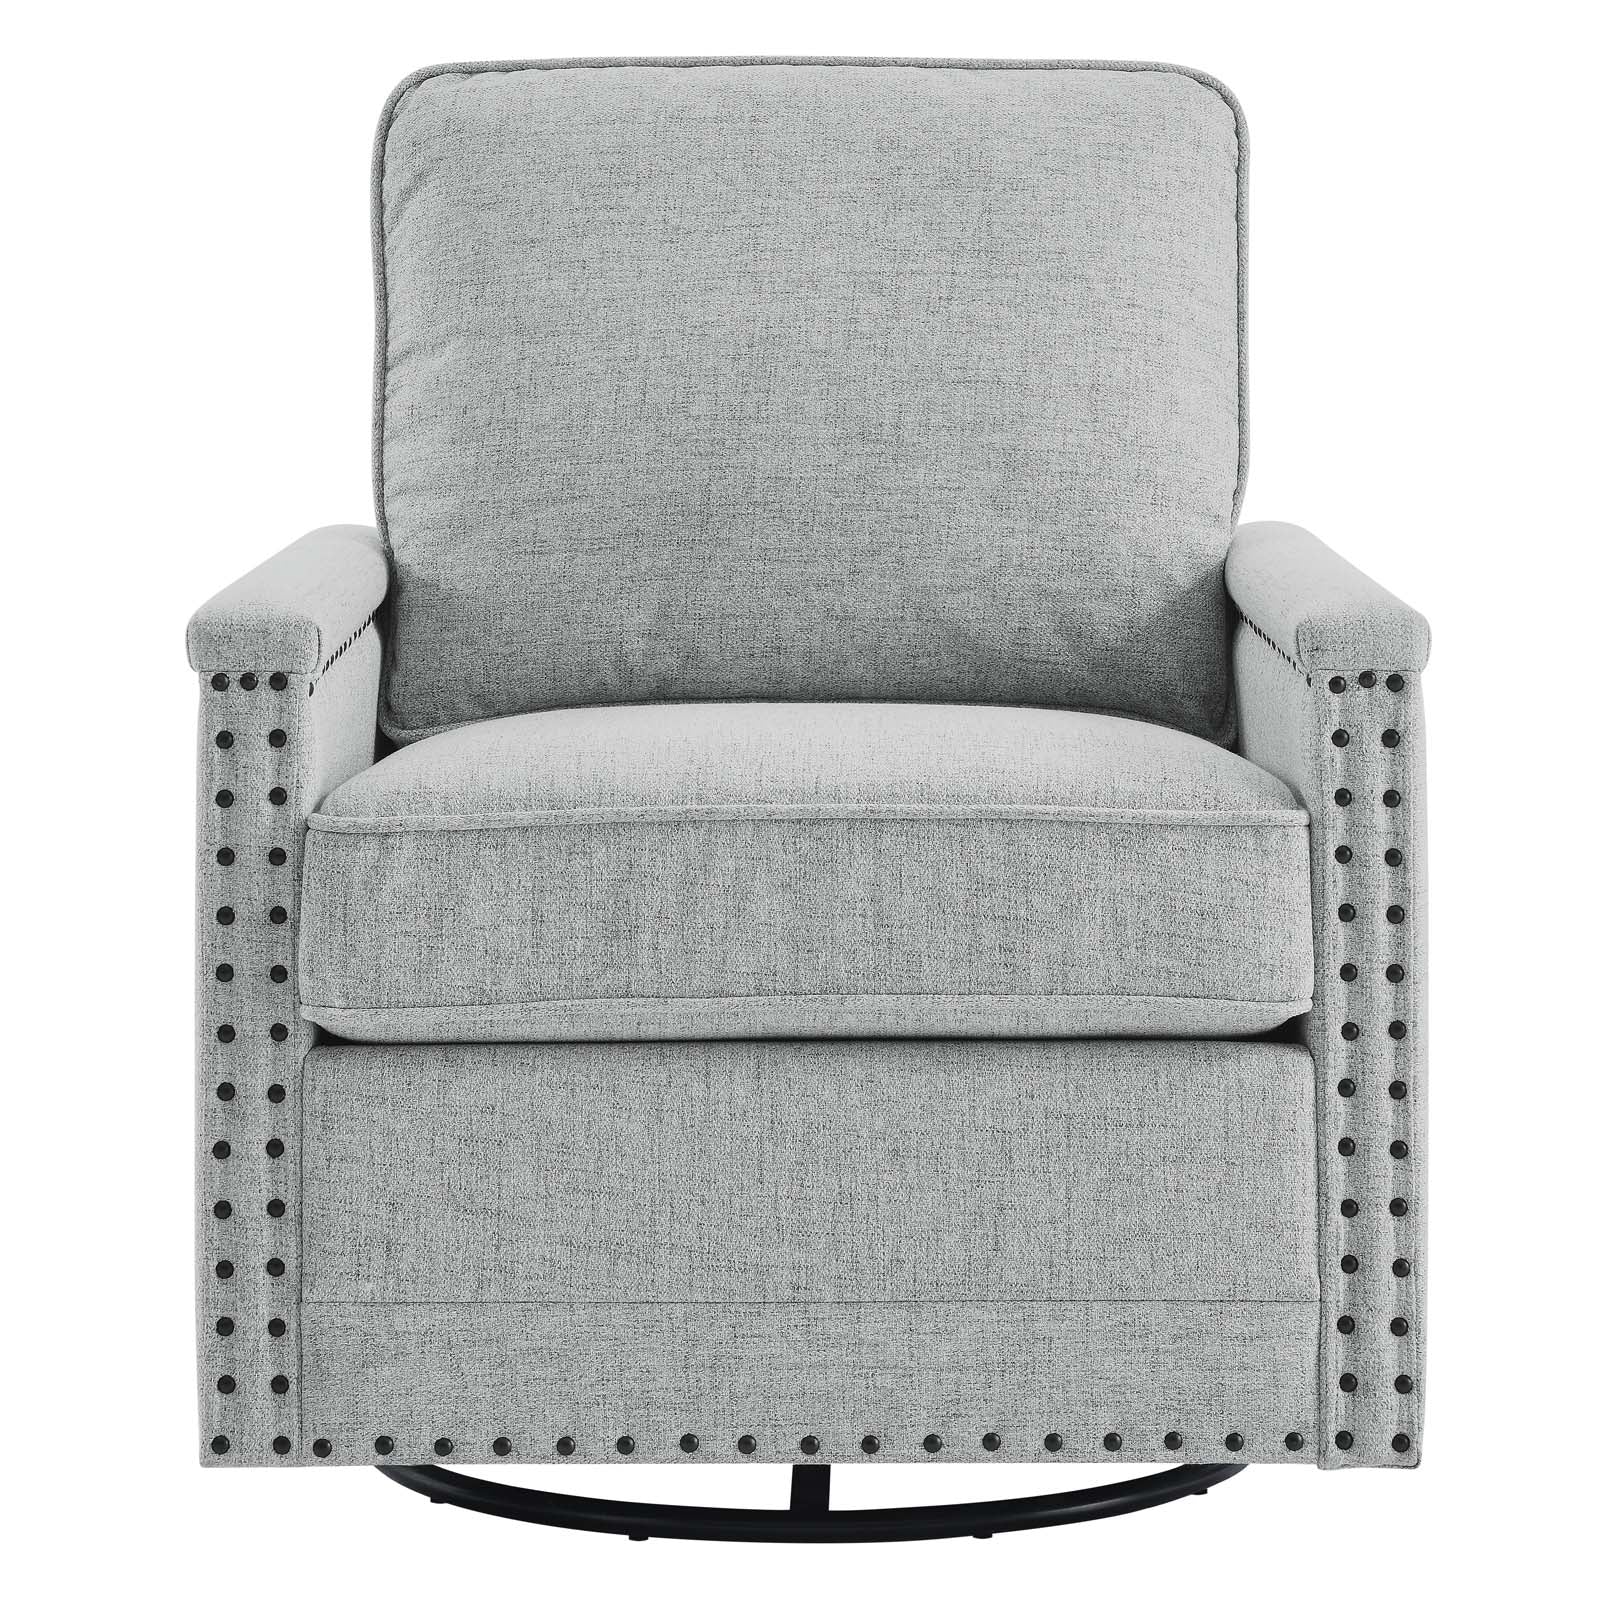 Modway Accent Chairs - Ashton Upholstered Fabric Swivel Chair Light Gray